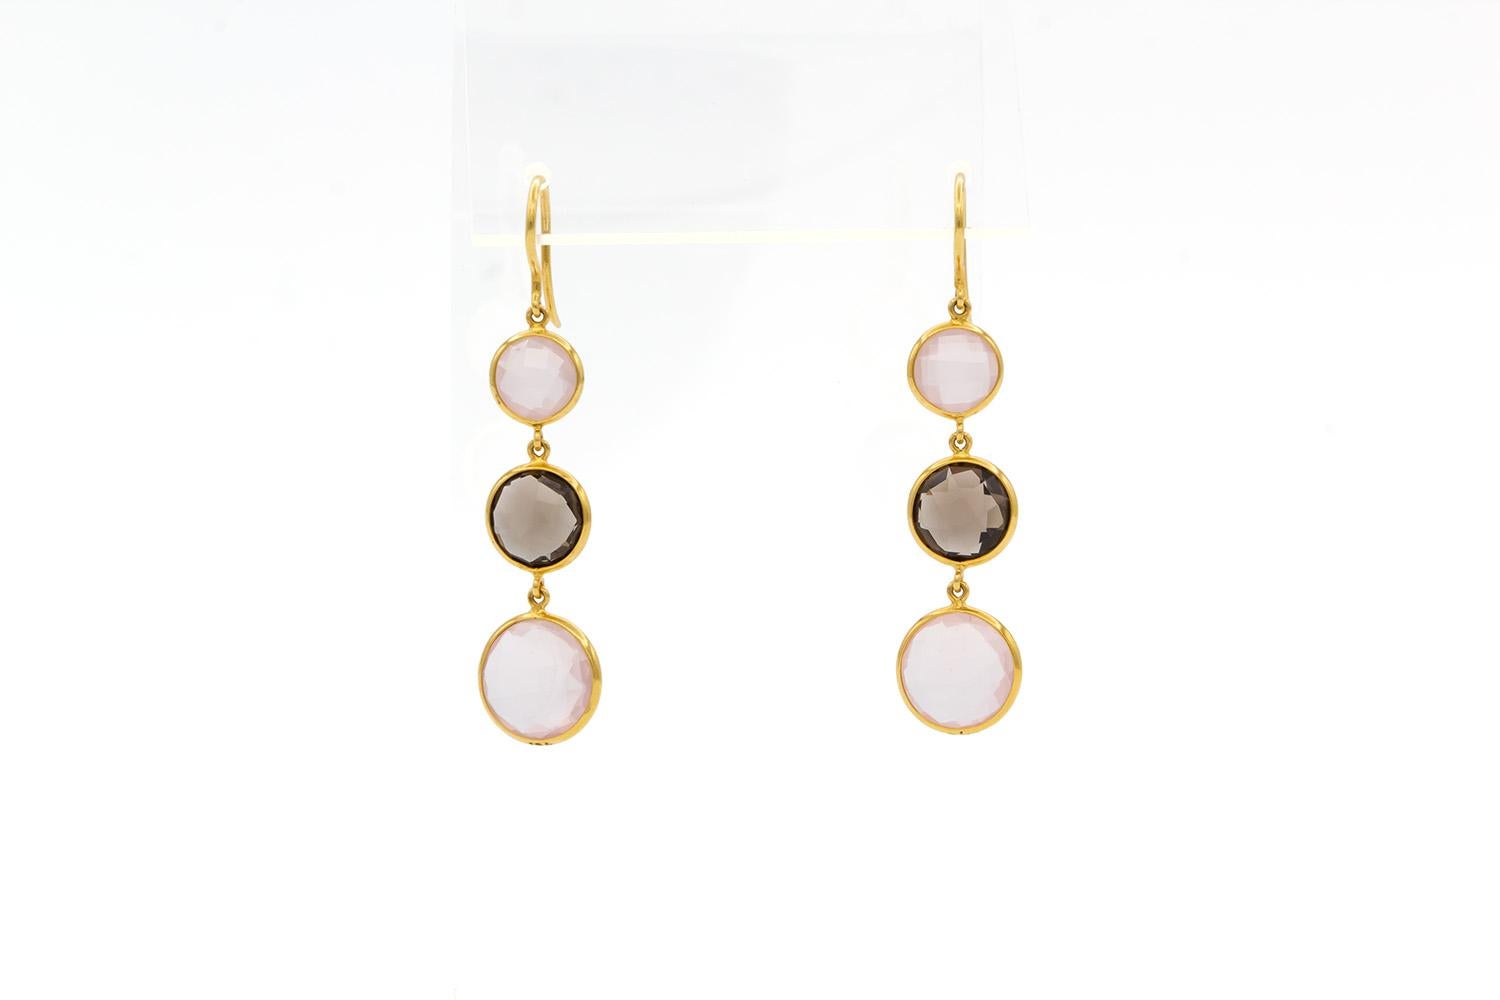 We are pleased to offer these Brand New Unworn Tresor 18k Yellow Gold Rose & Smokey Cabochon Rose Cut Quartz Dangle Drop Earrings. These stunning earrings are fun and vibrant! They feature 15.23ctw rose & smokey quartz stones set in 18k yellow gold